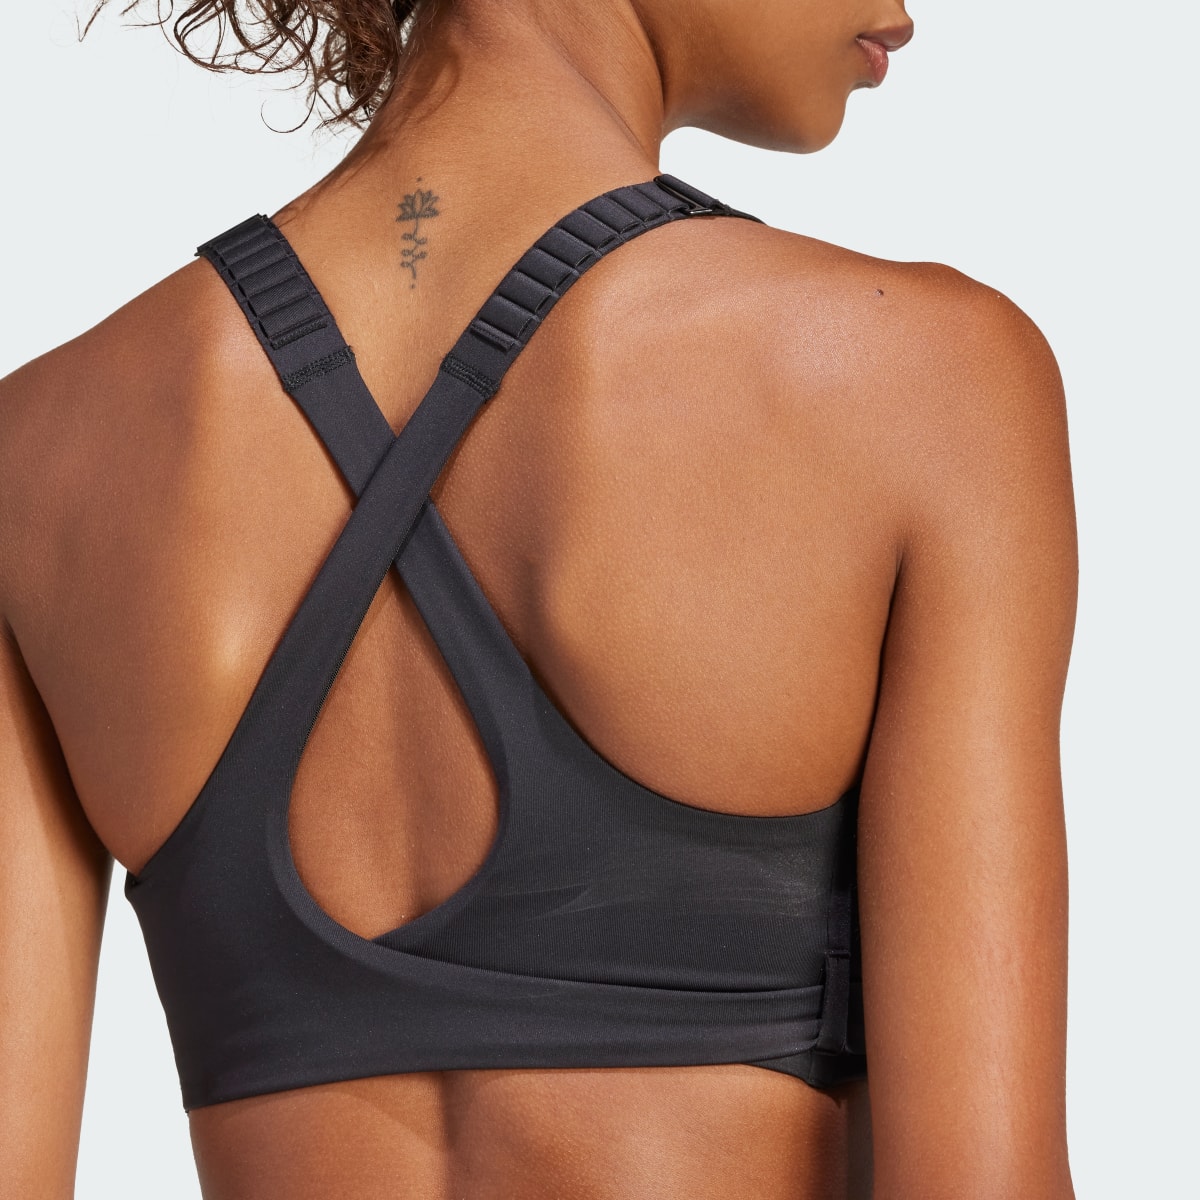 Adidas Brassière FastImpact Luxe Run Maintien fort. 8